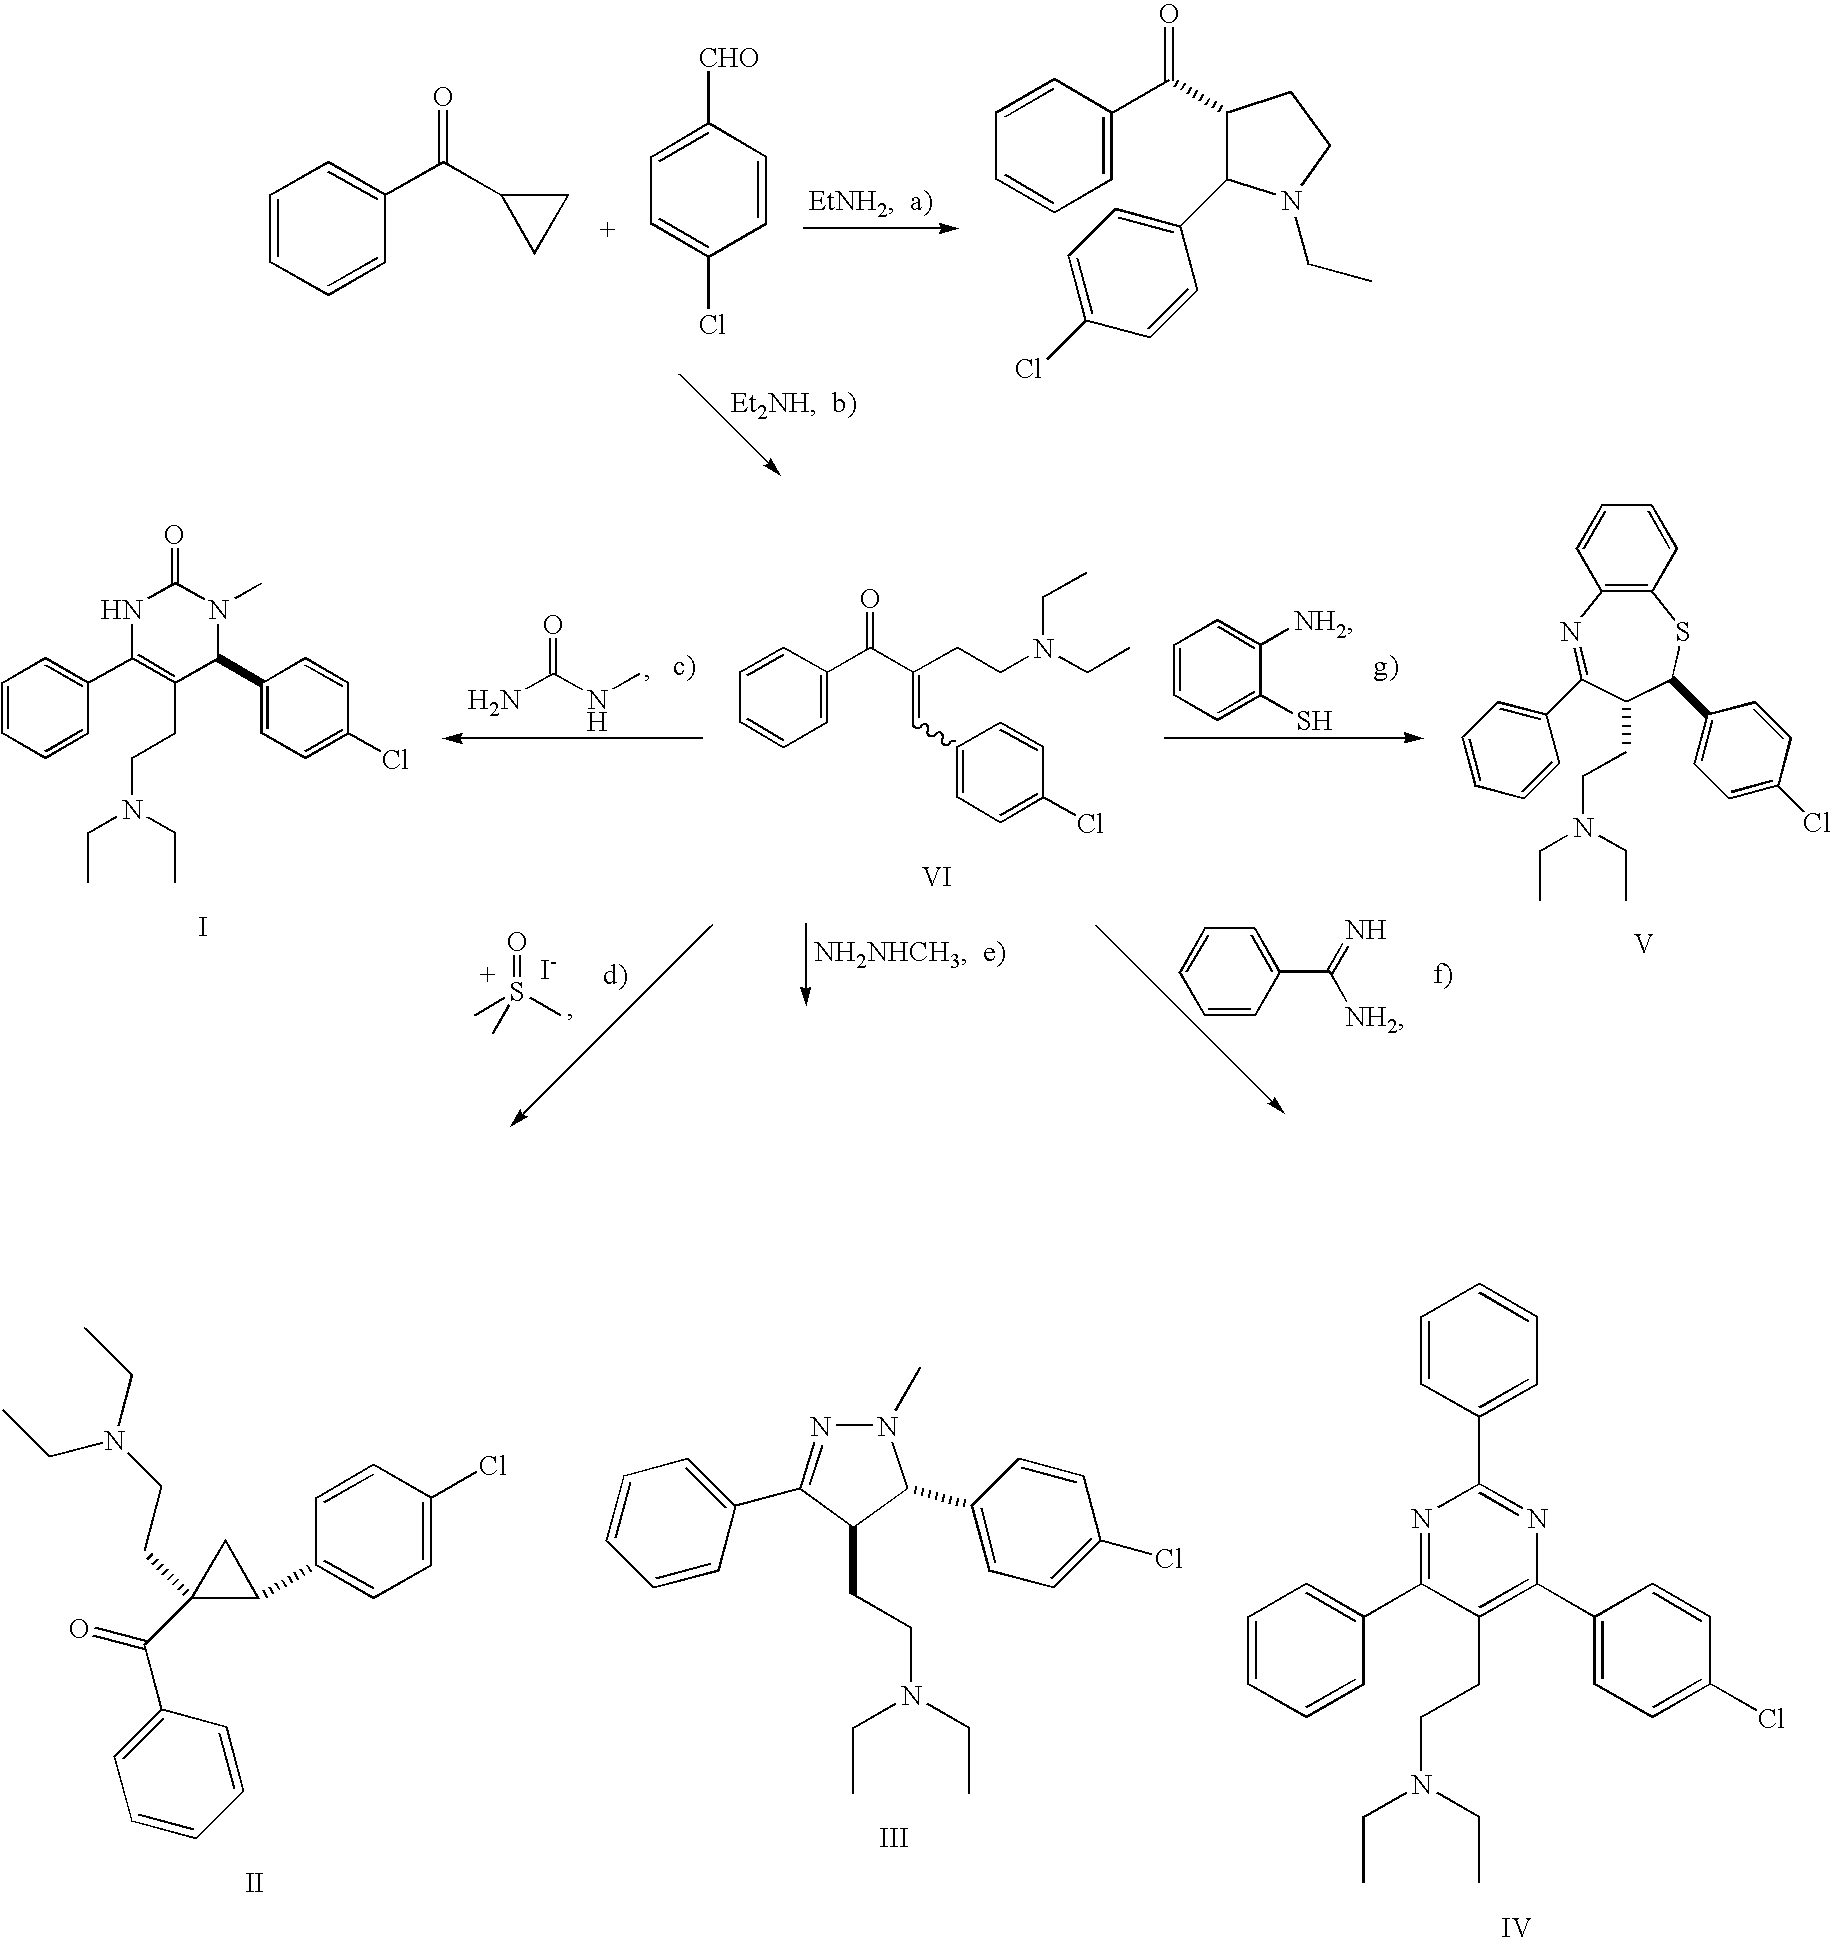 2-Aminoethyl Substituted Pyrimidin-2-Ones Cyclopropanes, Pyrazolines, Pyrimidines and Benzothiazepines and Their Uses as Urotensin II and Somatostatin 5 Receptor Ligands